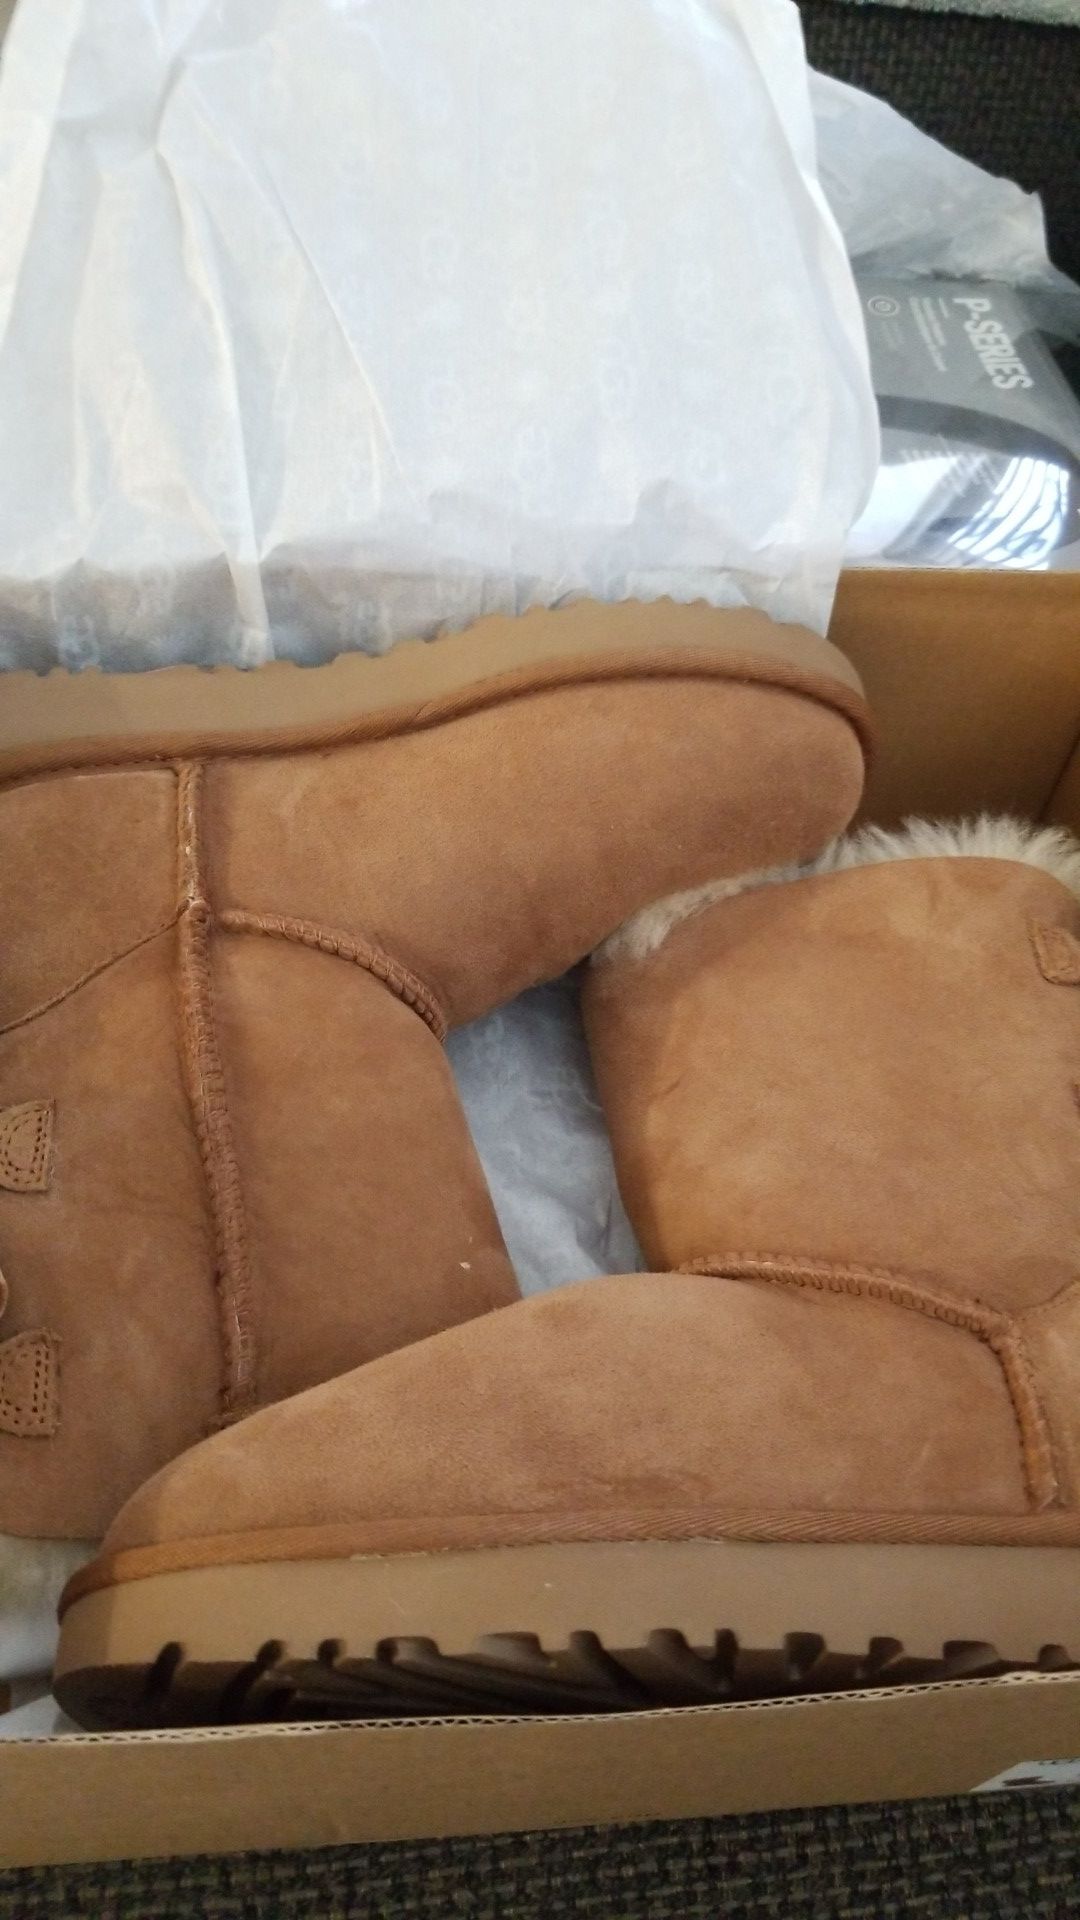 New ugg size 5